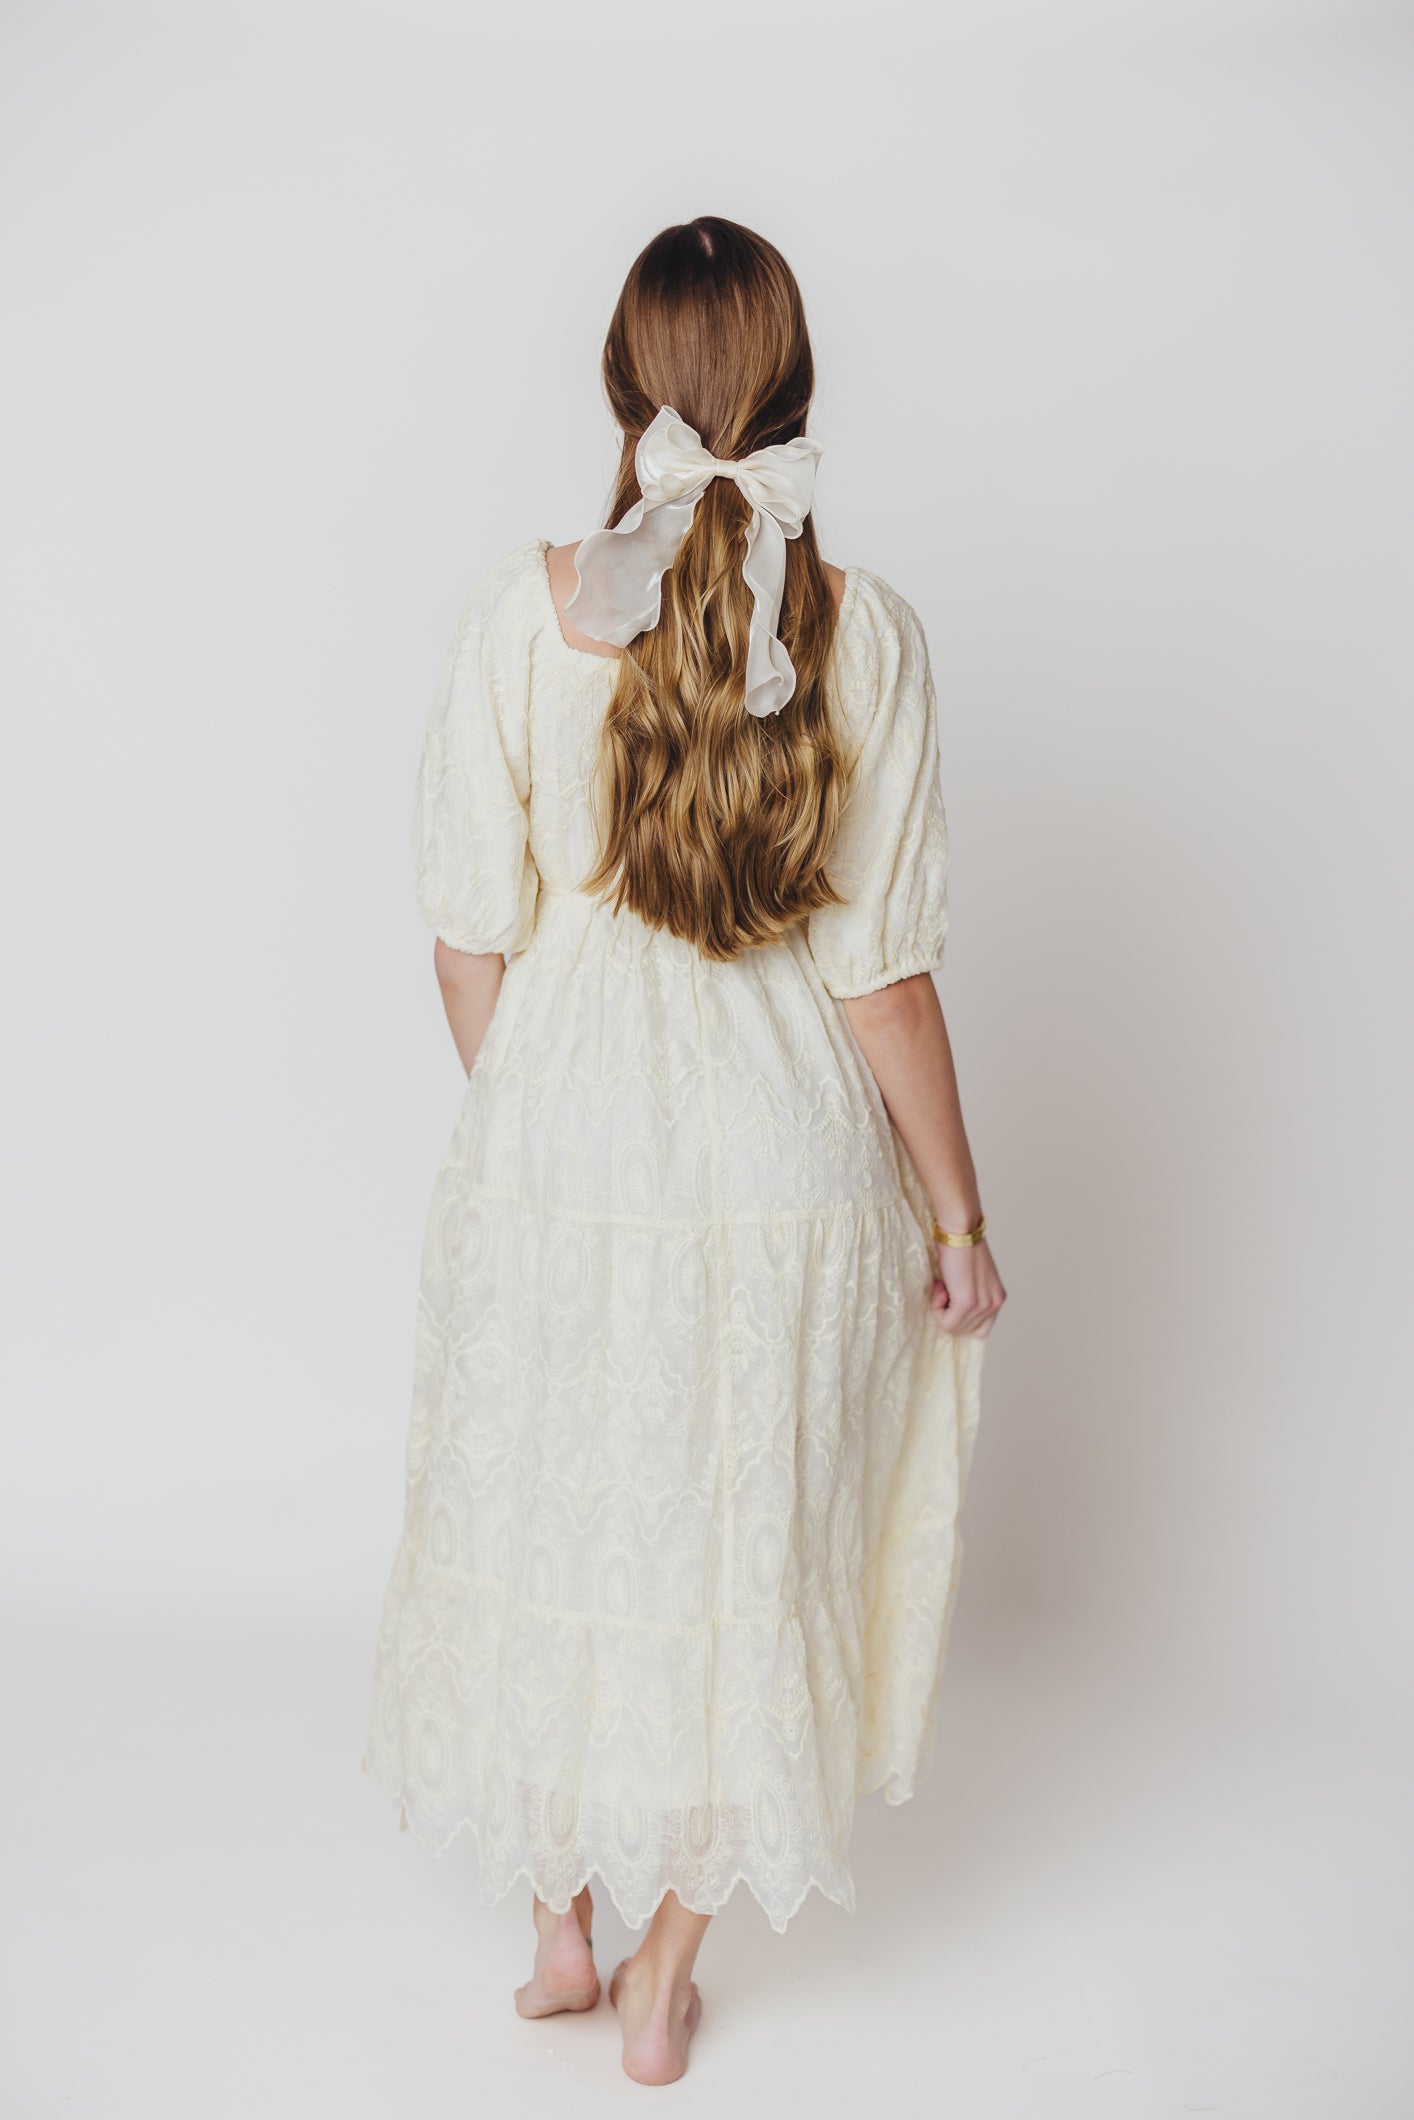 Stella Tiered Maxi Dress with Lace Overlay in Natural - Bump Friendly & Inclusive Sizing (S-3XL)